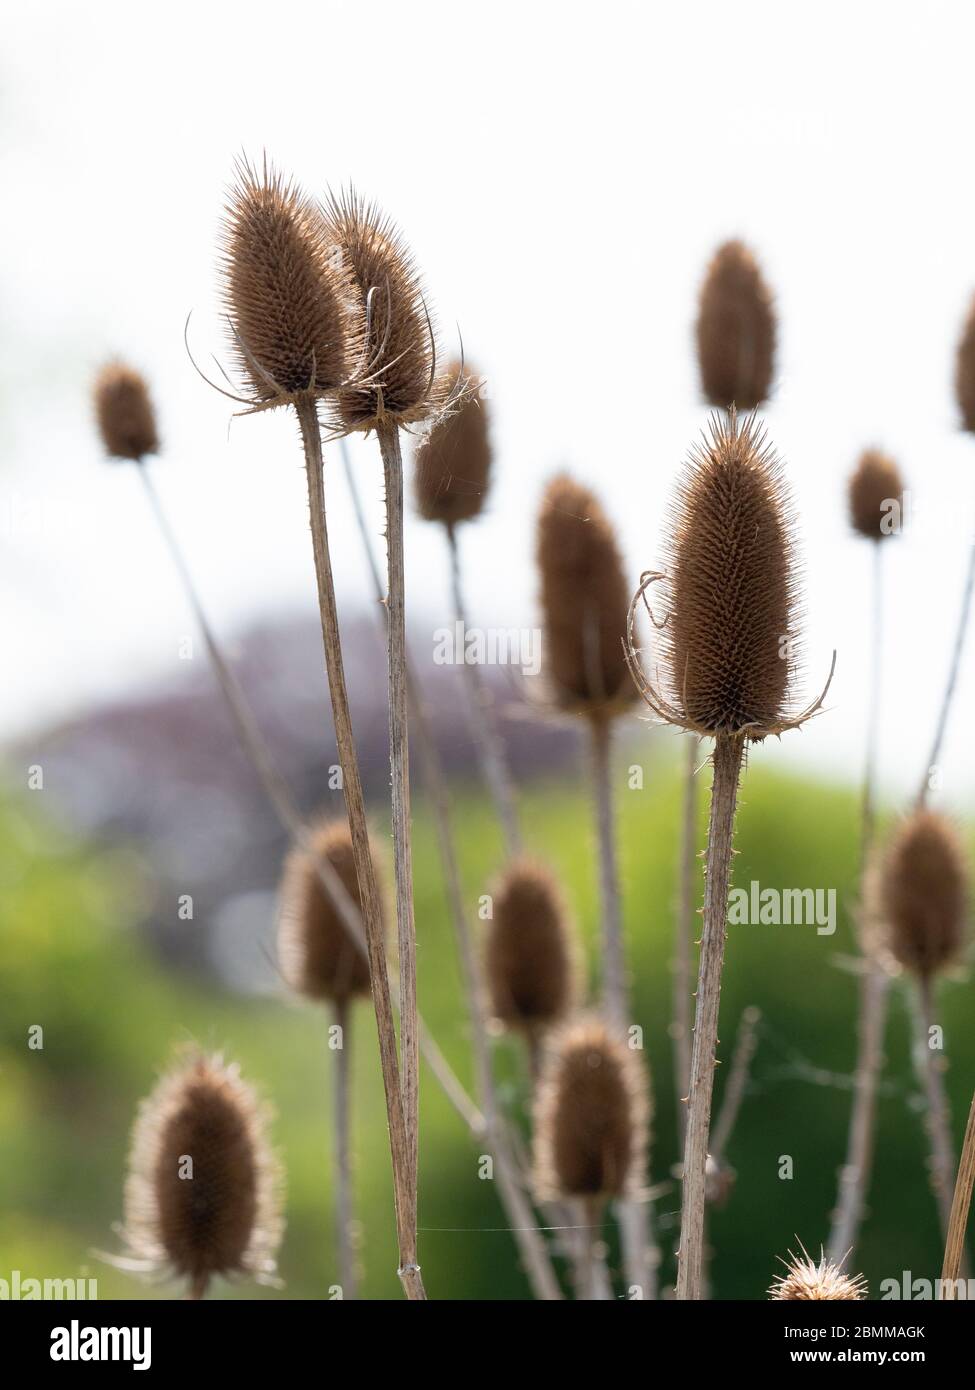 A group of thistles. Stock Photo